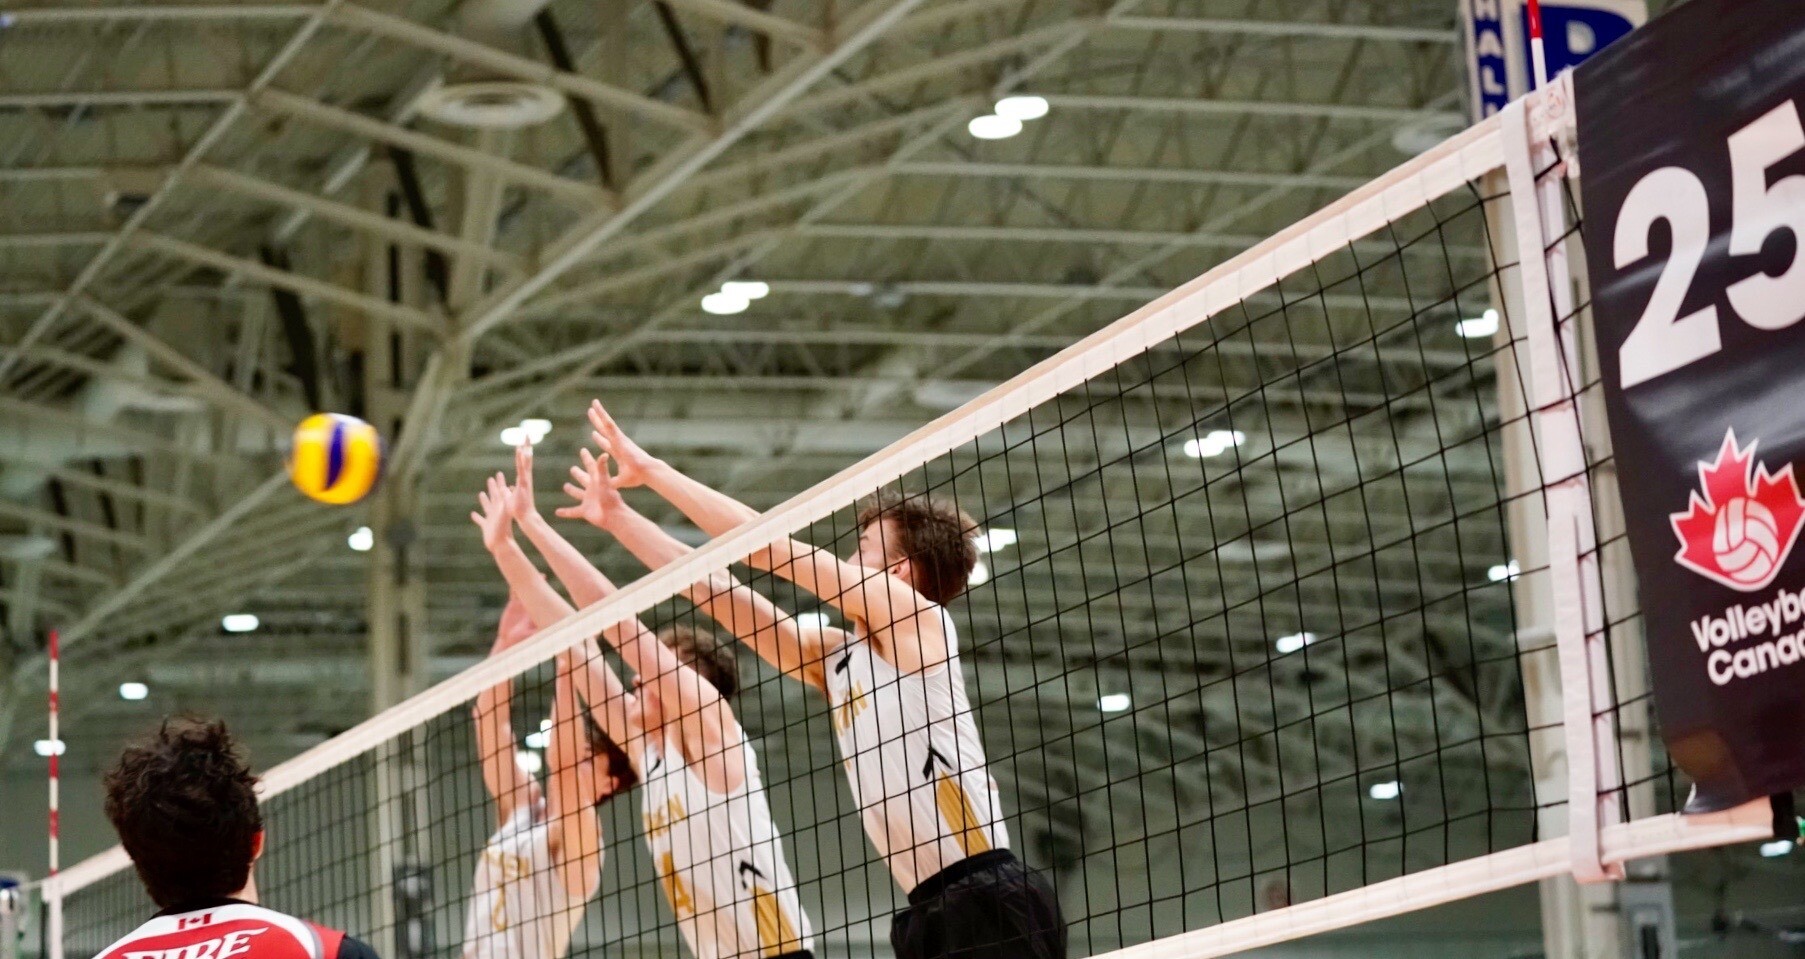 Basic Volleyball Drills to Do Before the Game